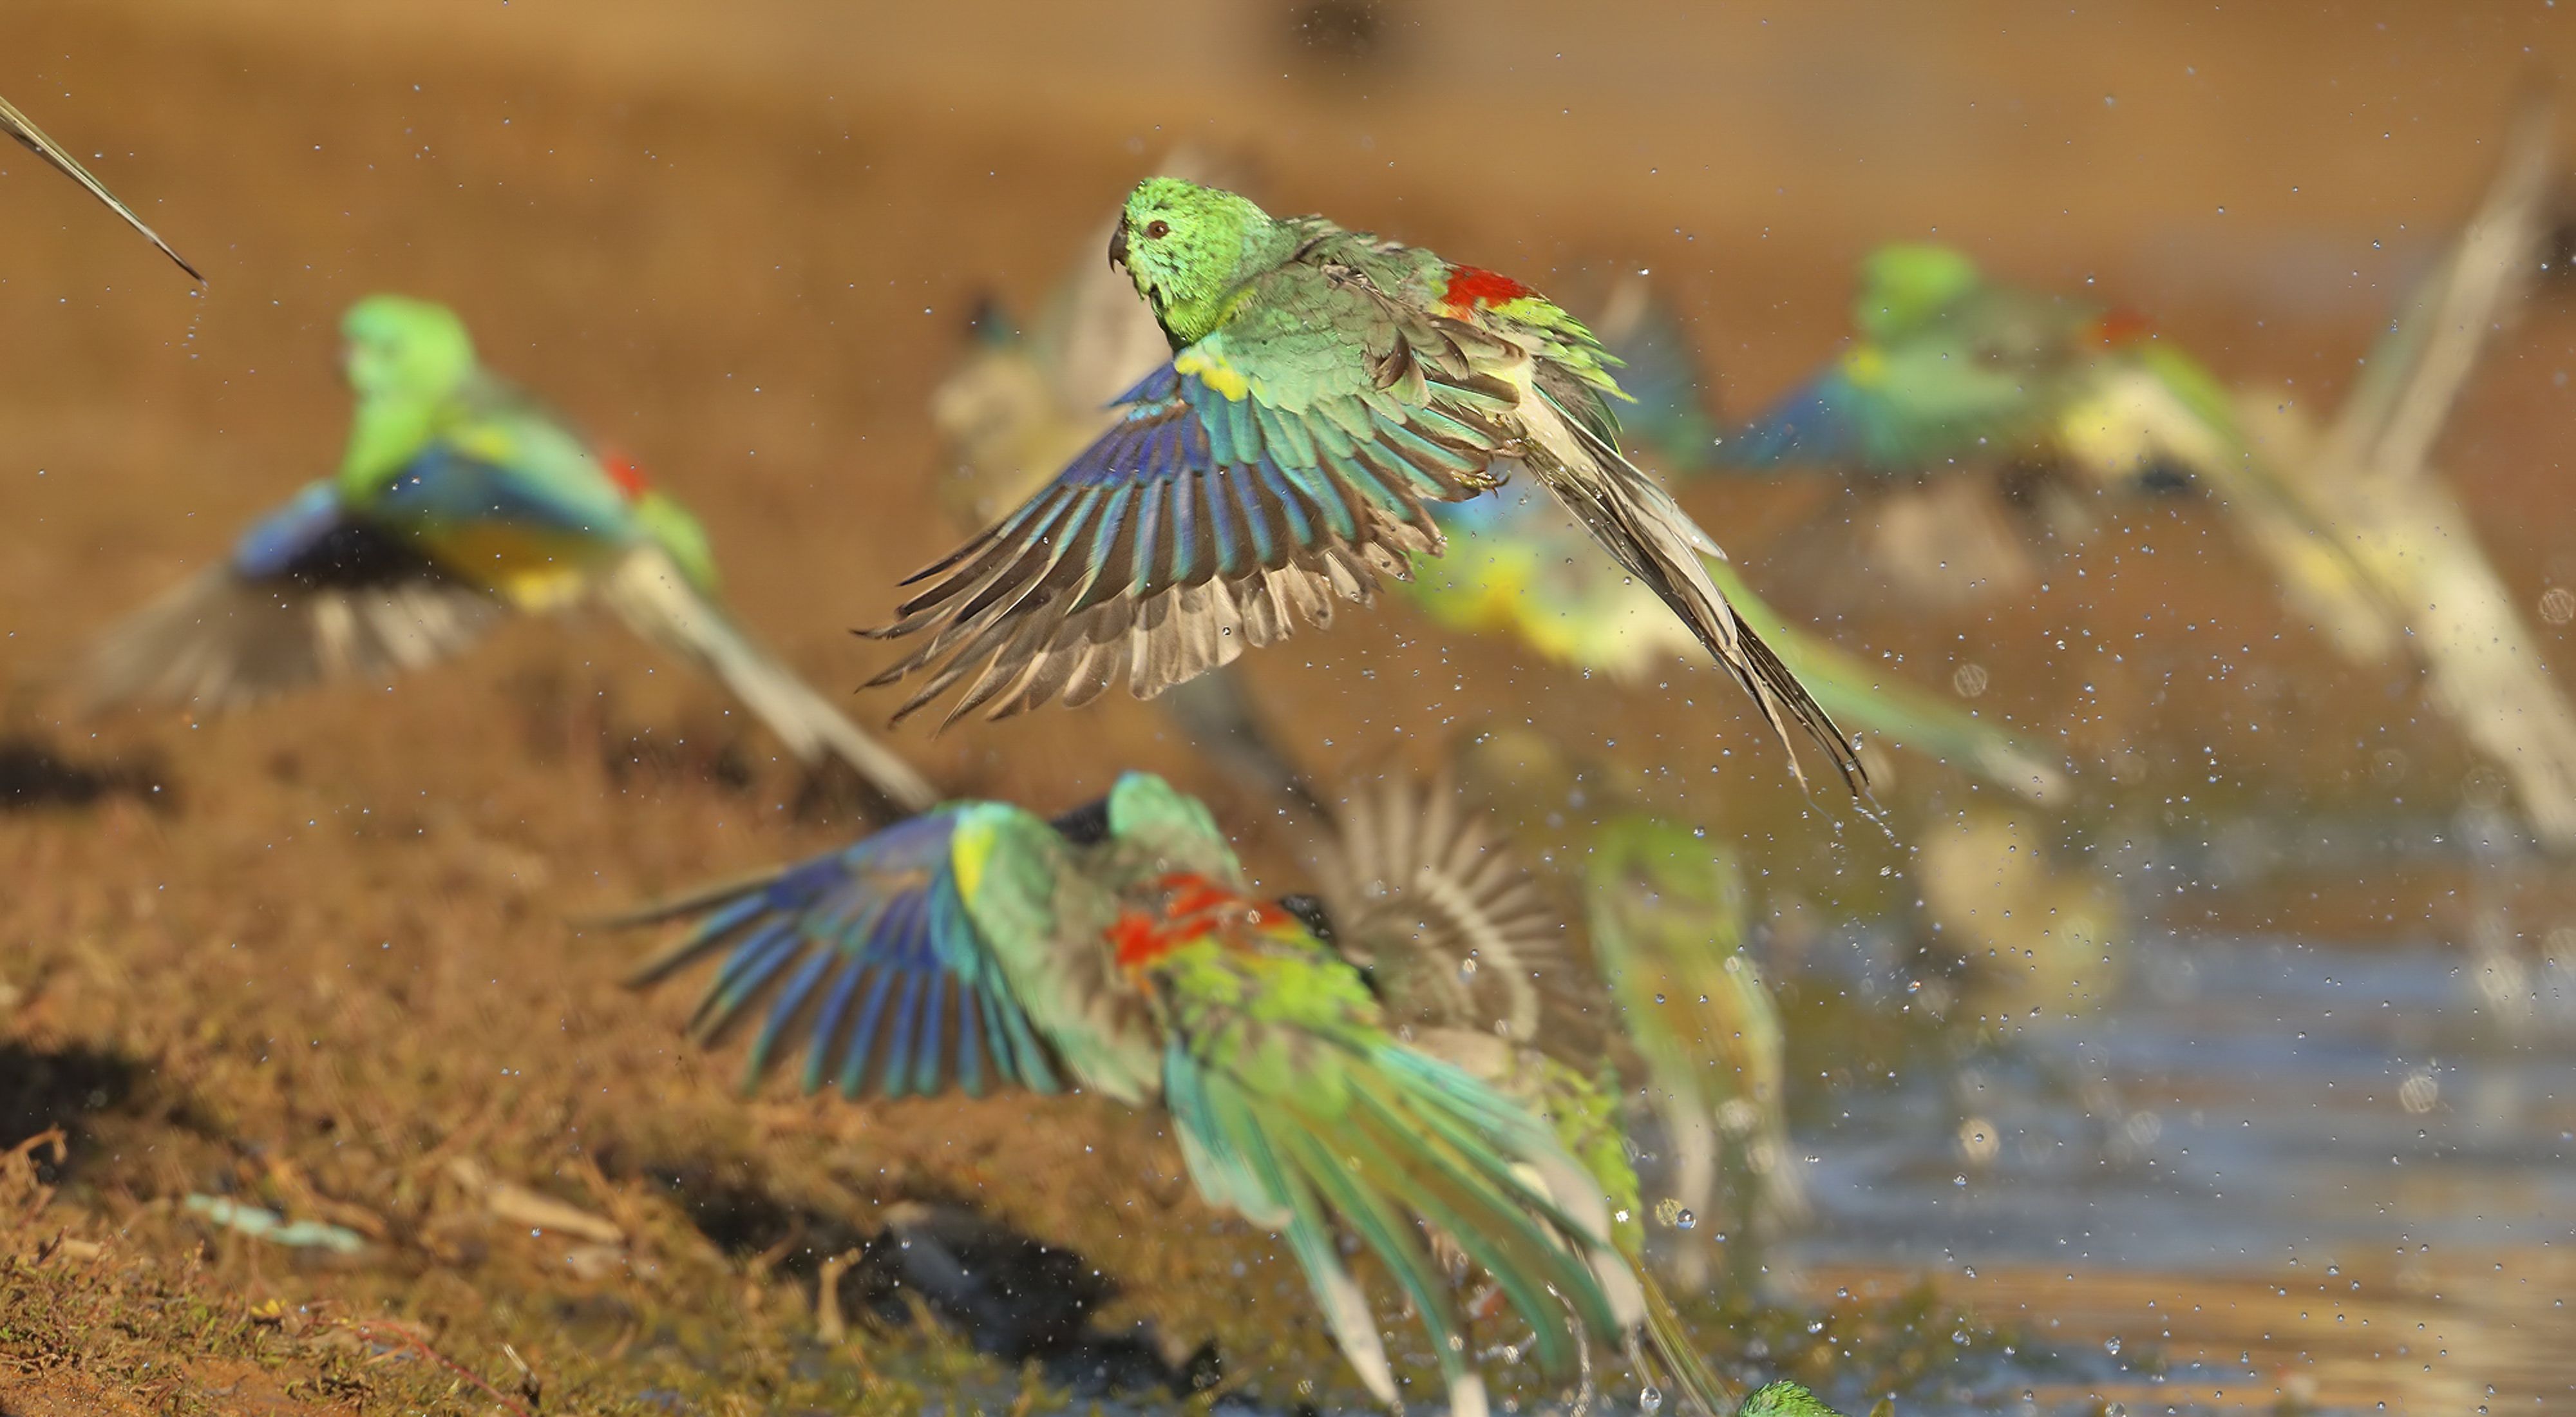 Red-rumped Parrots leaving a waterhole after a drink and a bath.